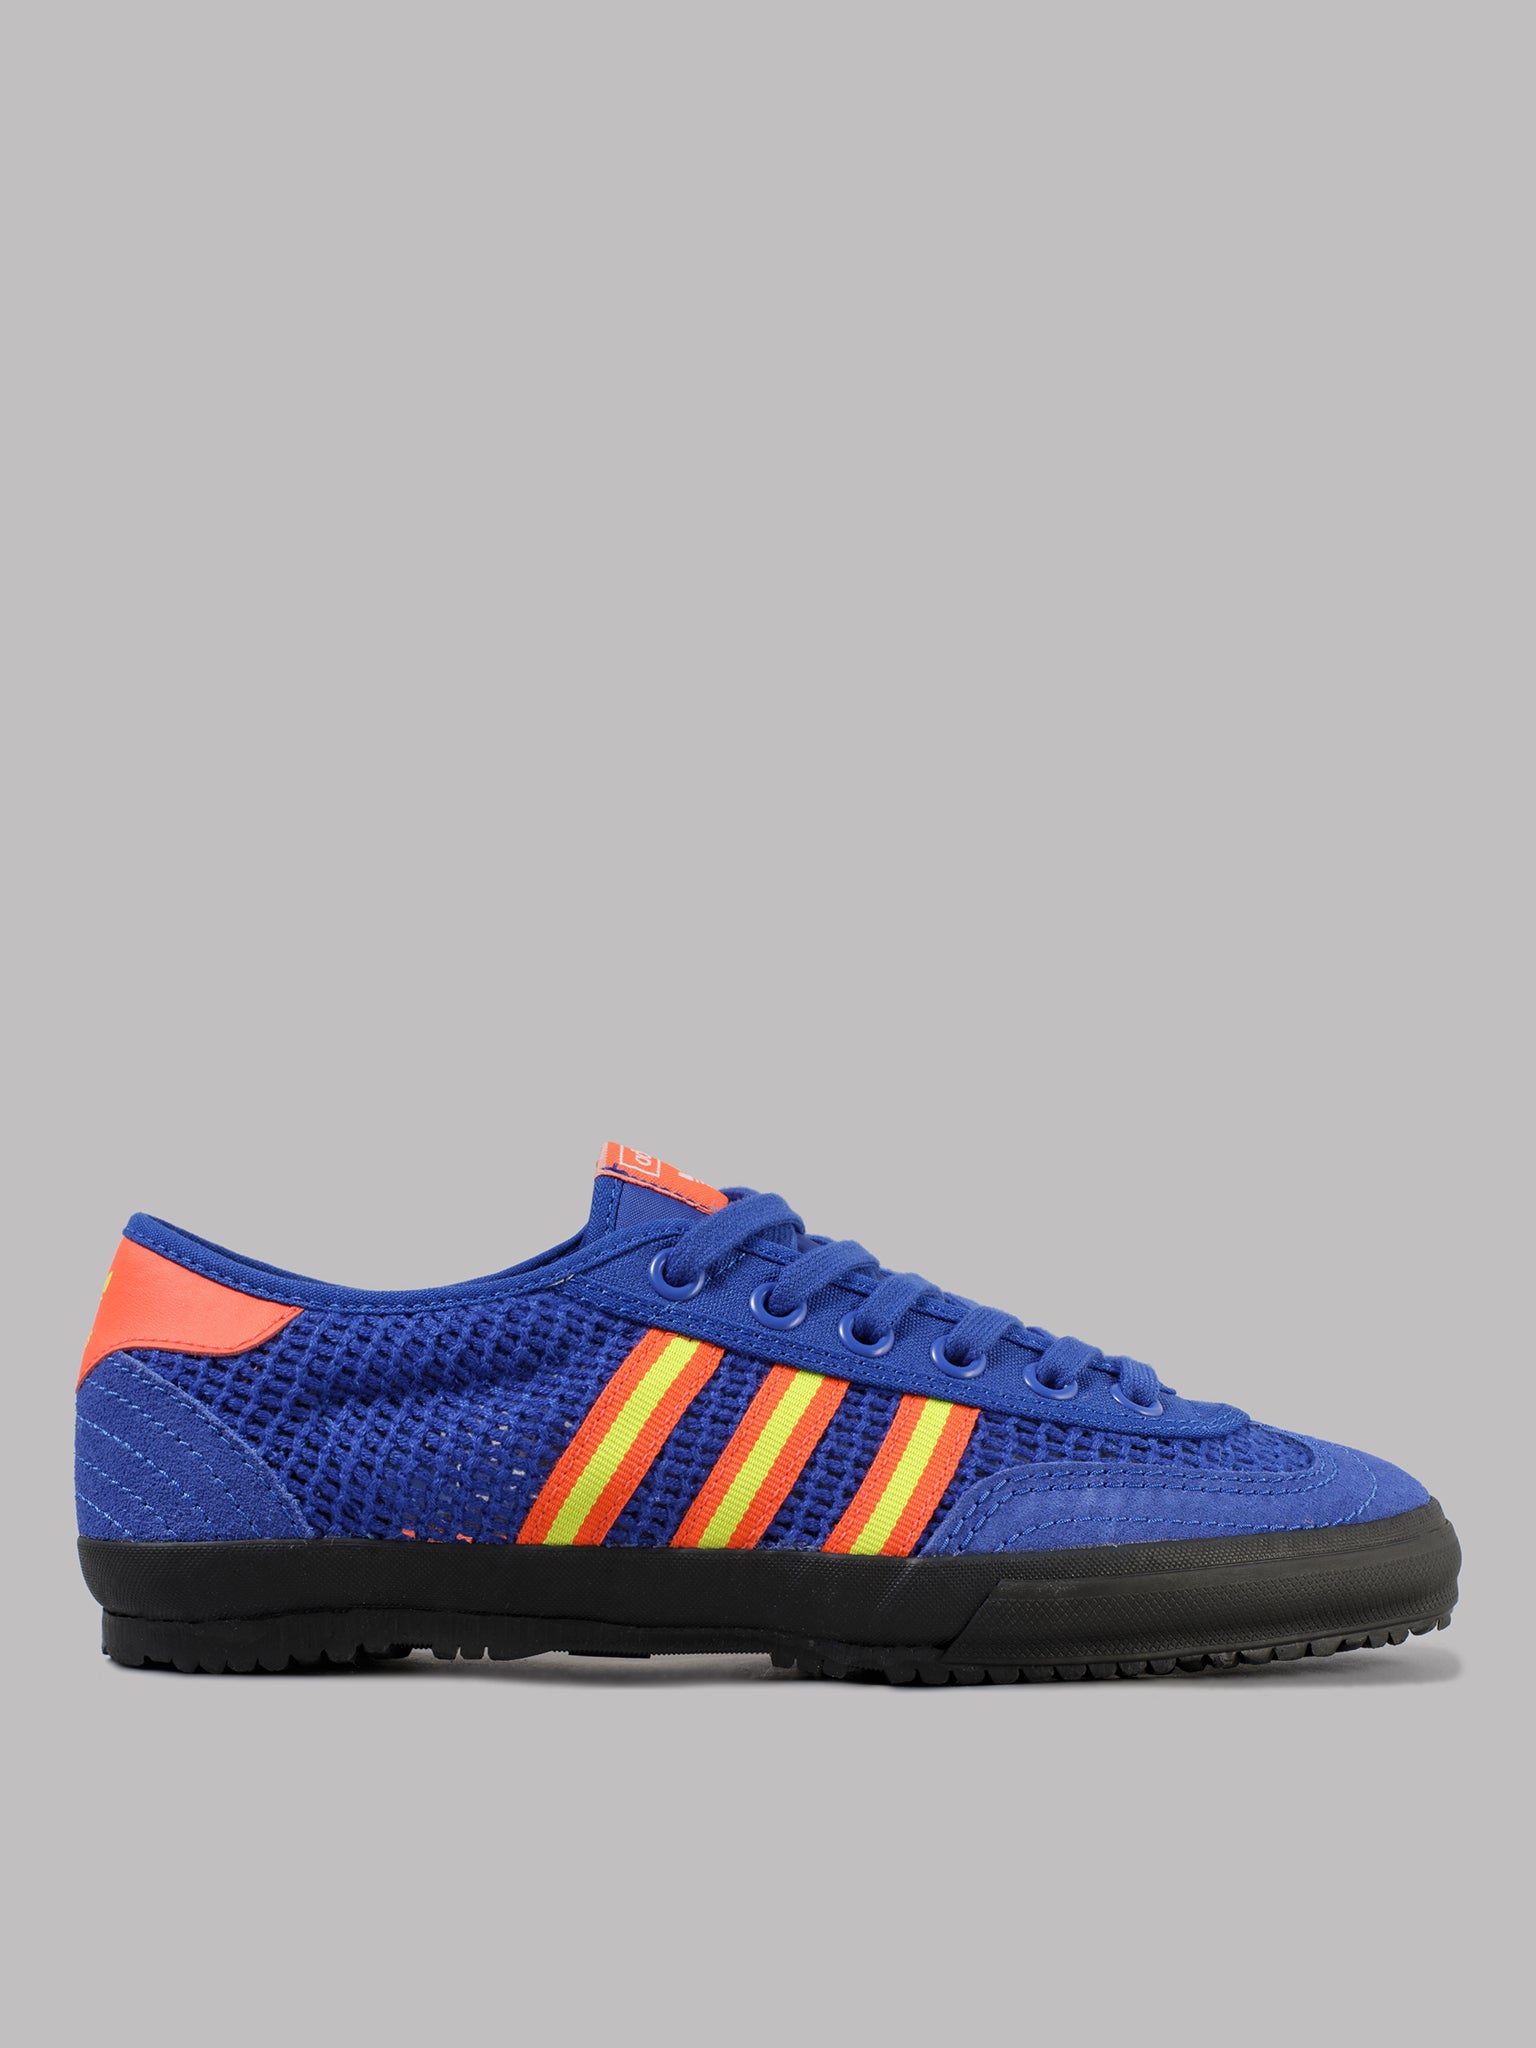 red yellow blue adidas